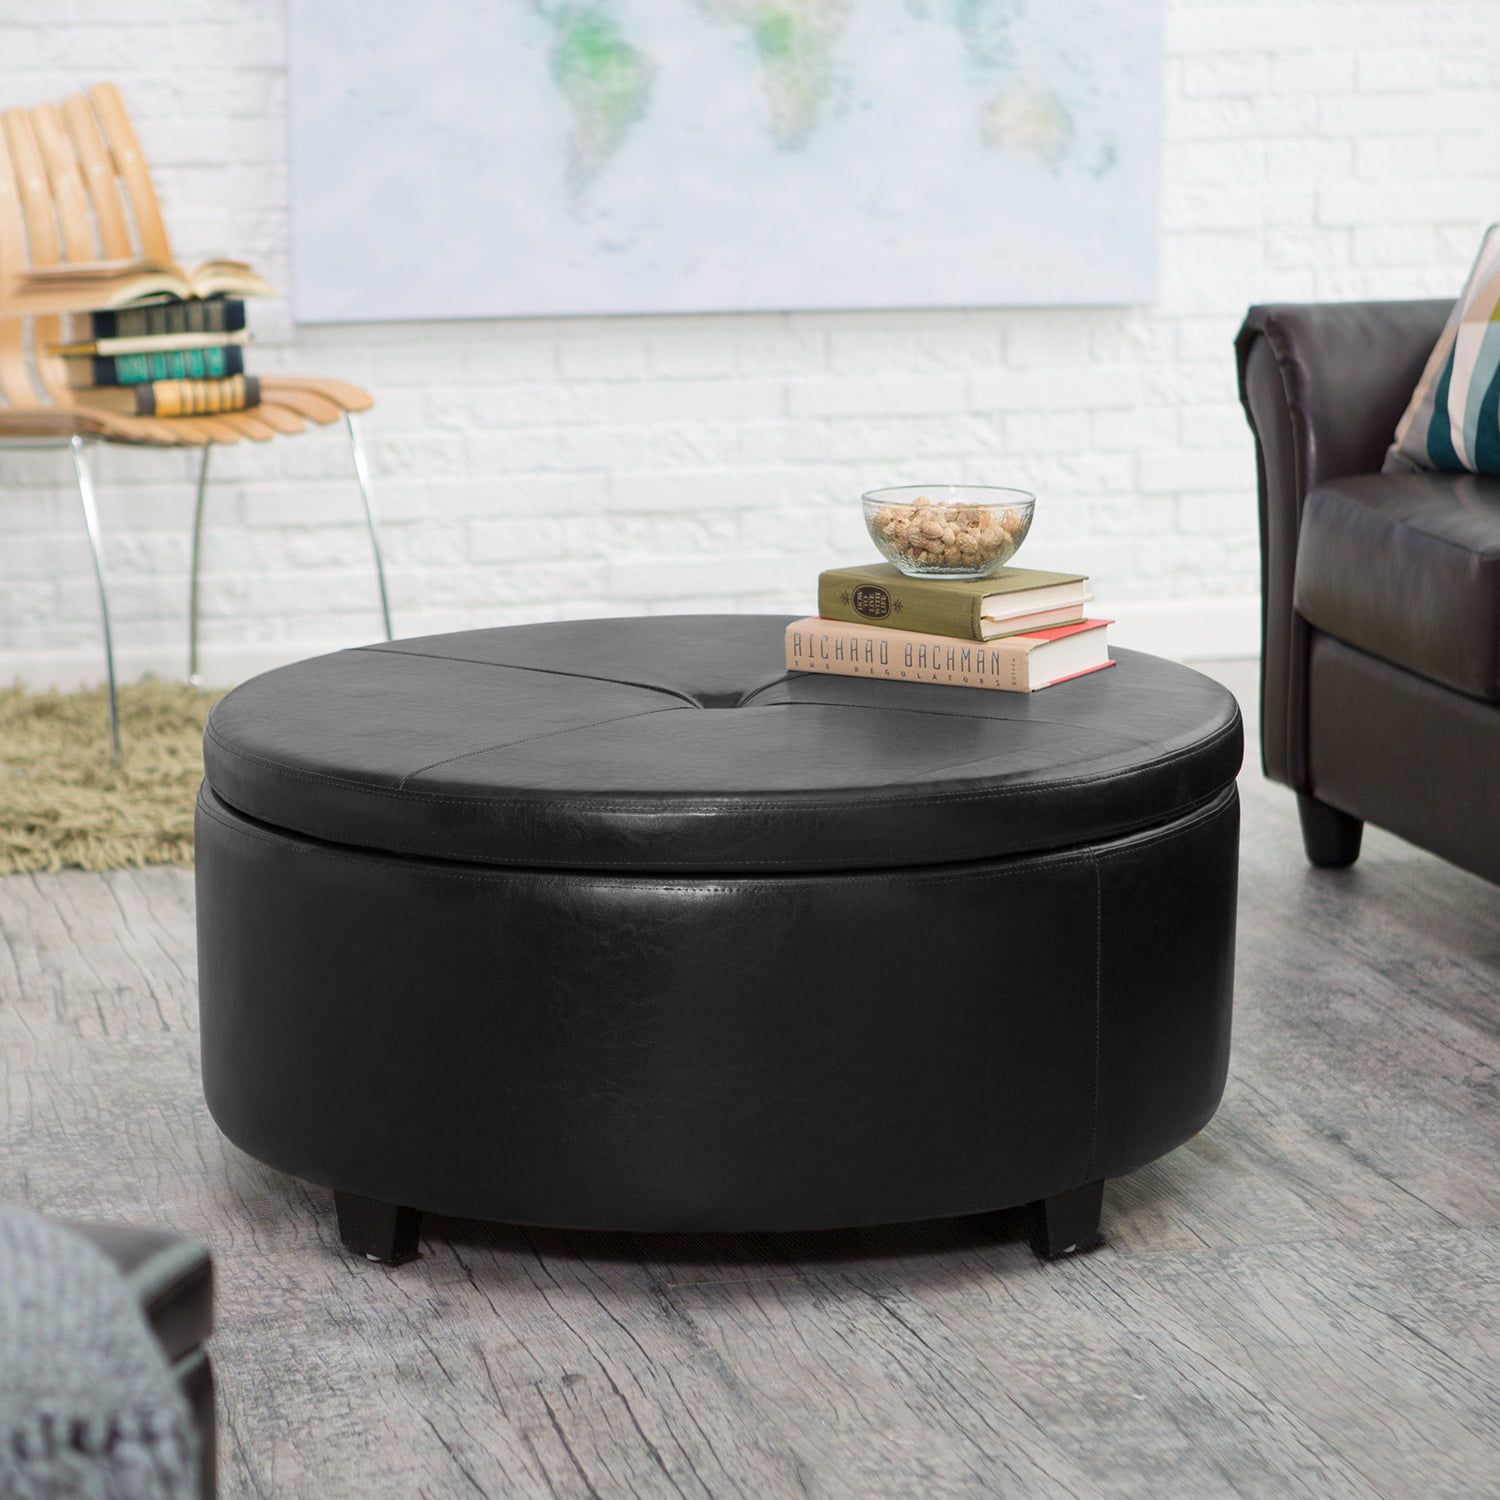 Lacoo Large Round Storage Ottoman Comfort Footrest, Black Faux Leather –  Walmart With Regard To Black Faux Leather Ottomans (View 2 of 15)